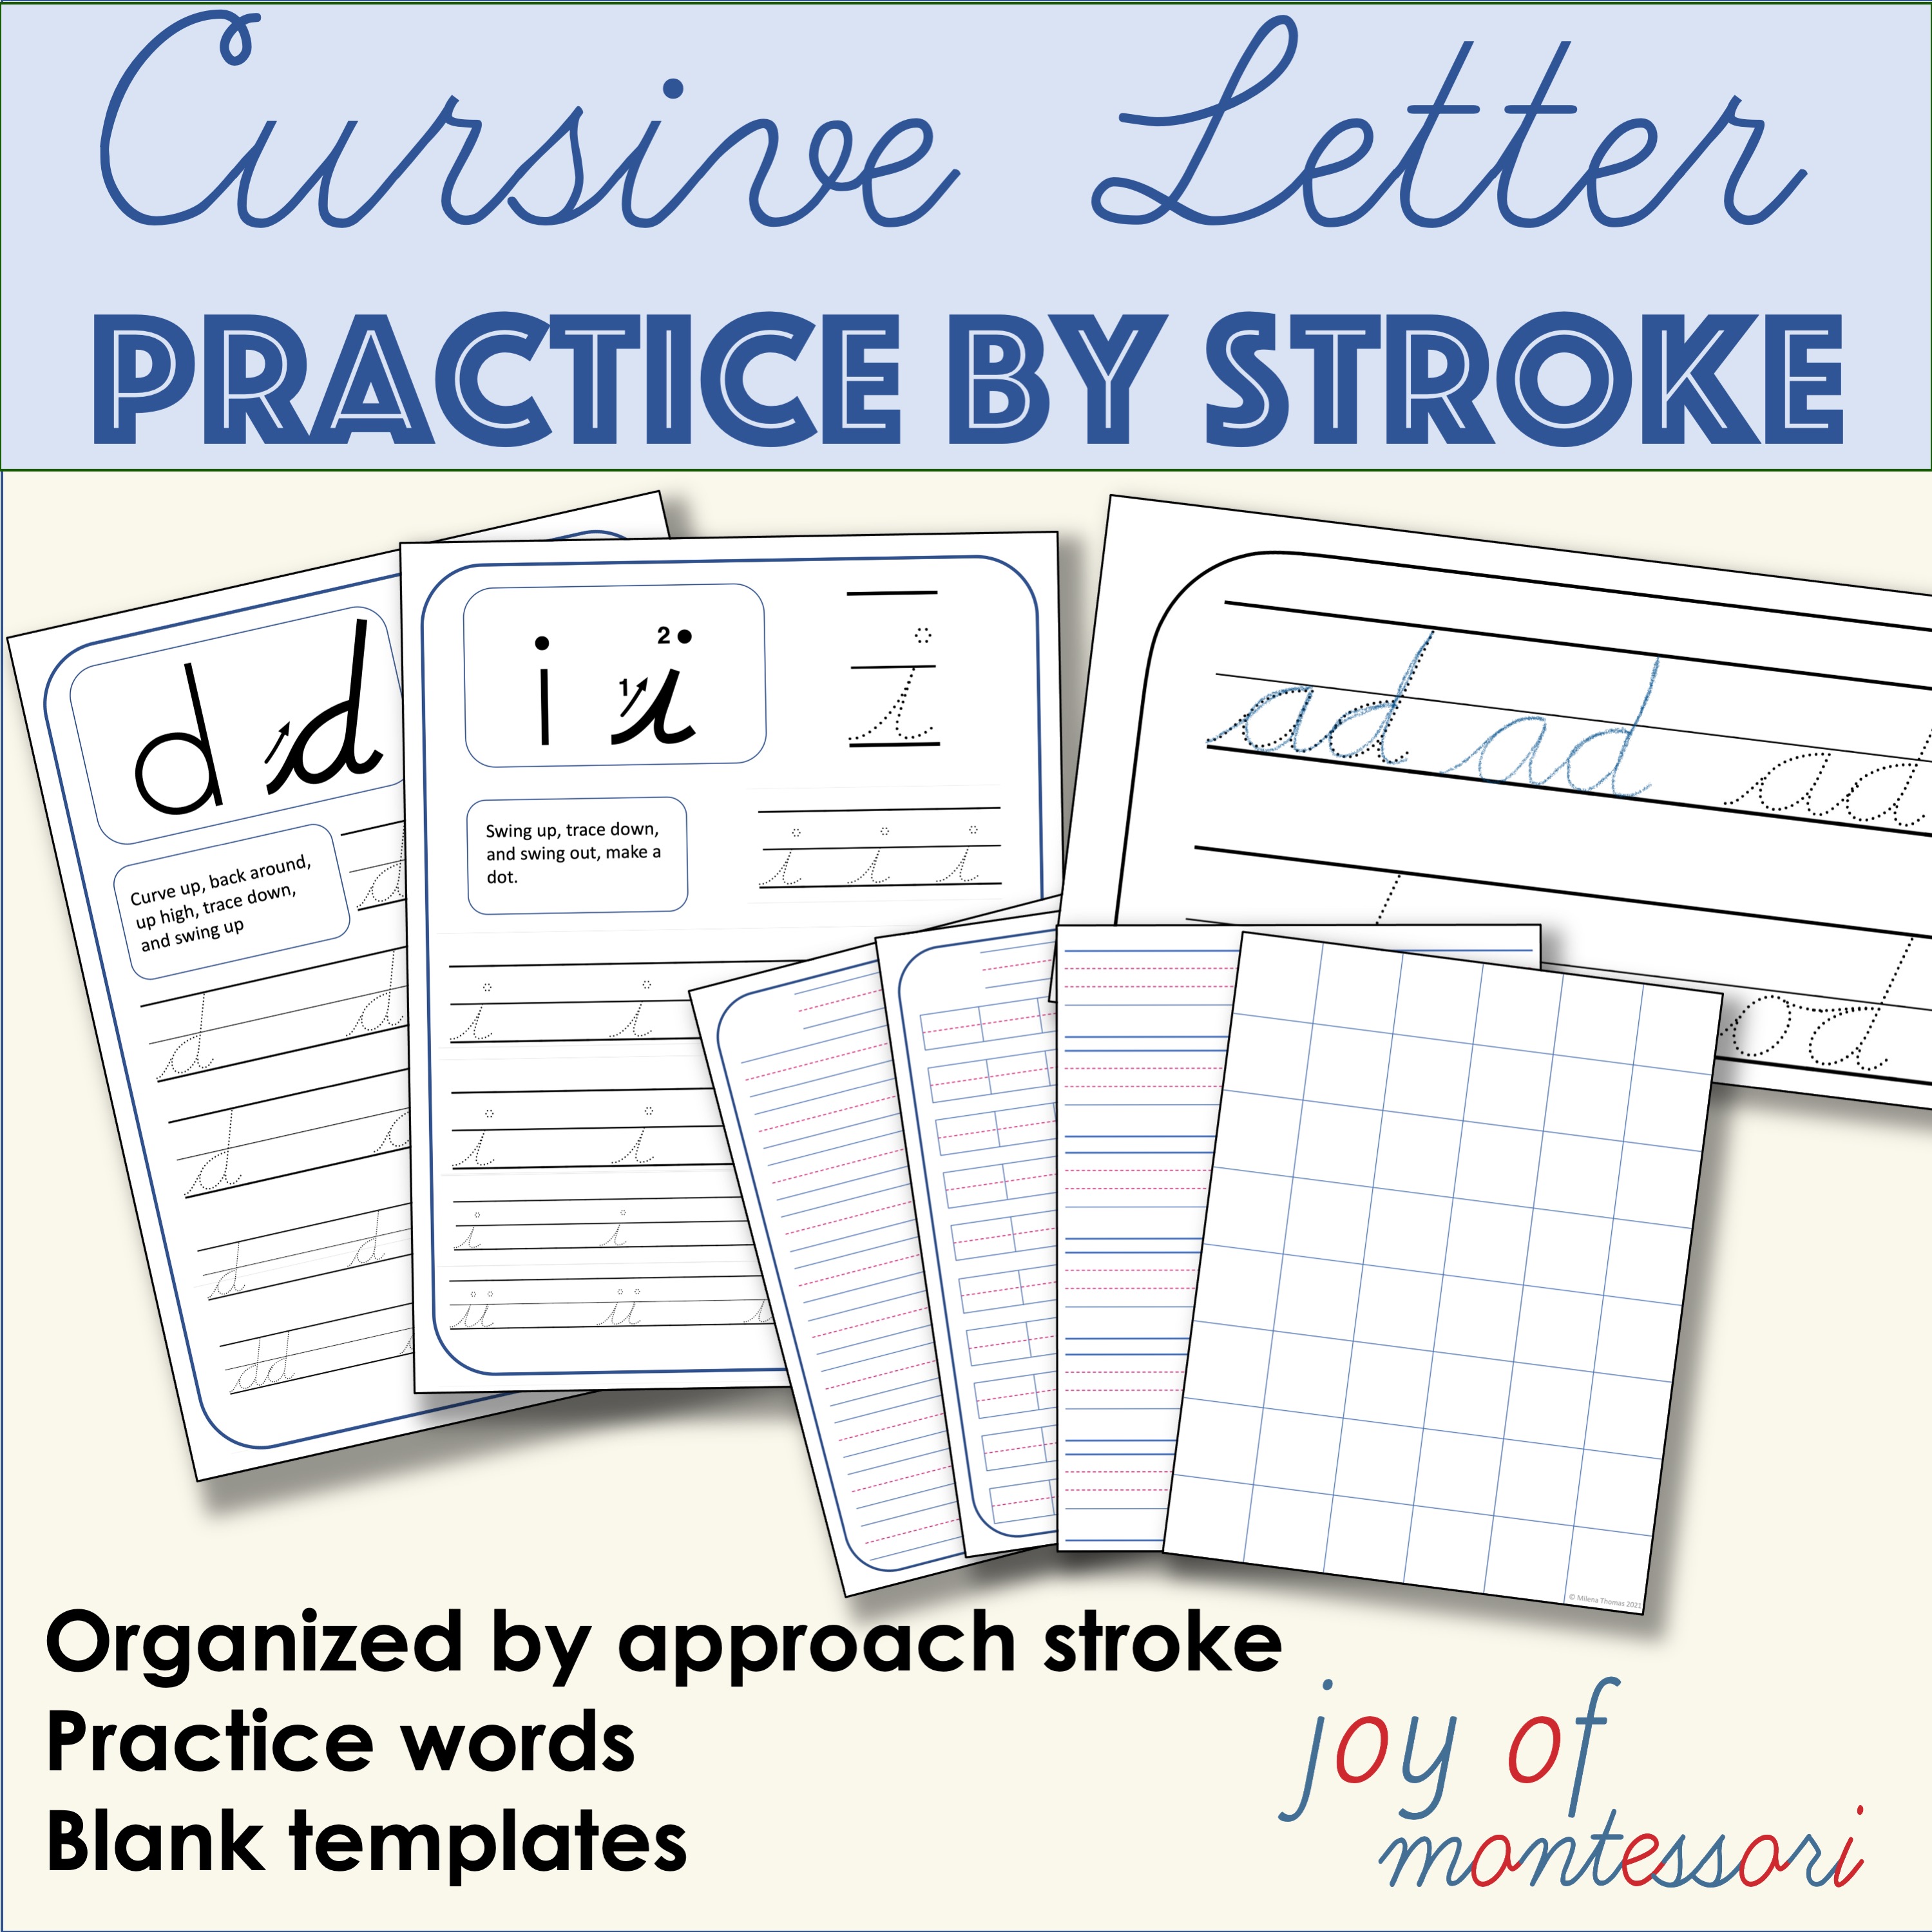 A close-up view of cursive tracing papers from the product, featuring lowercase letters of varying sizes and grouped by approach strokes.